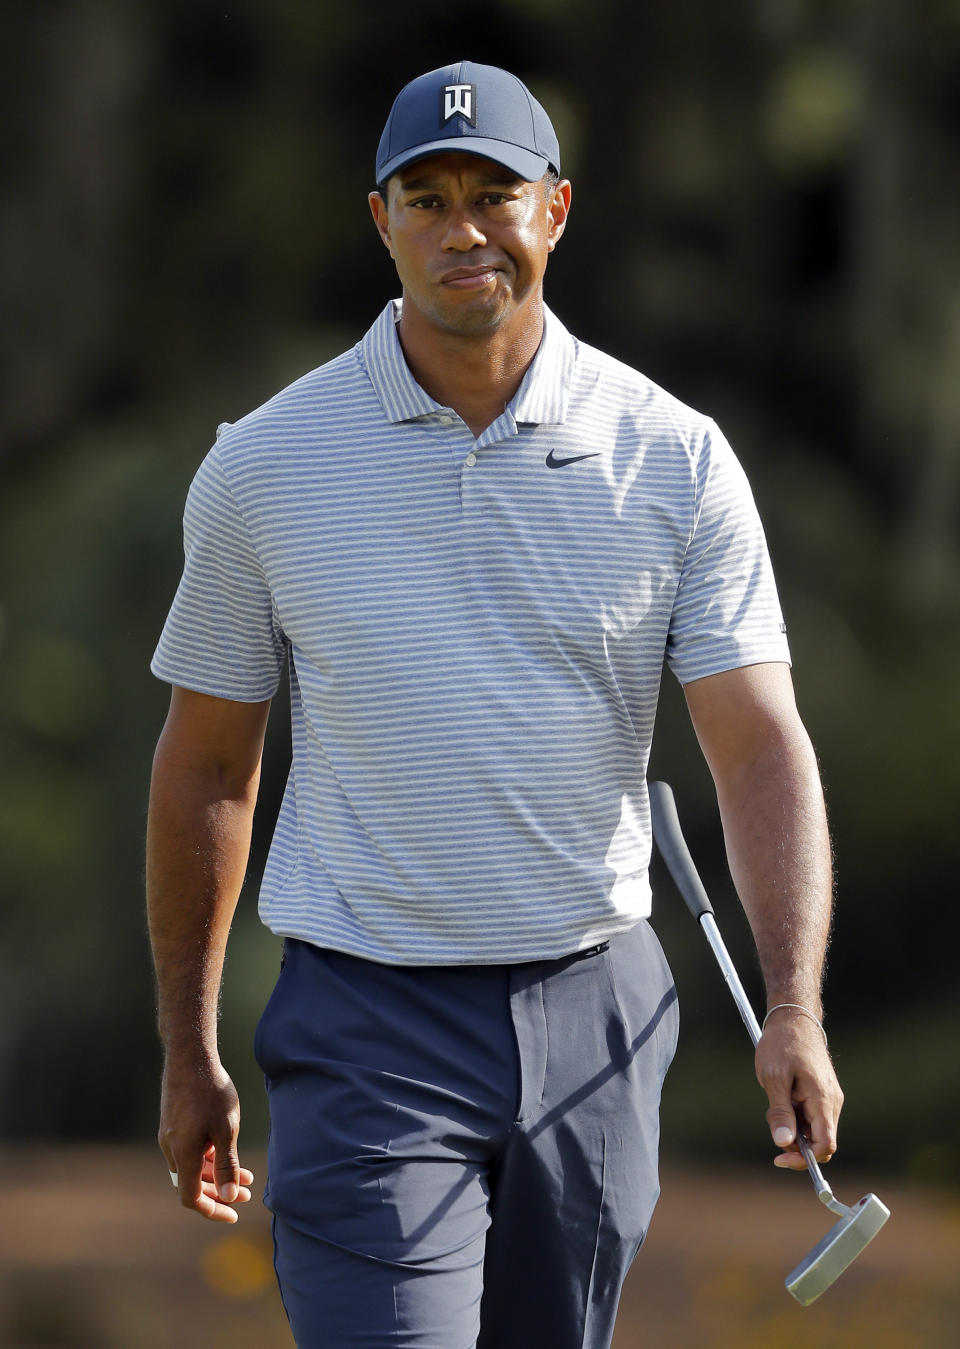 Tiger Woods reacts to a missed putt on the 12th hole during the second round of The Players Championship golf tournament Friday, March 15, 2019, in Ponte Vedra Beach, Fla. (AP Photo/Gerald Herbert)